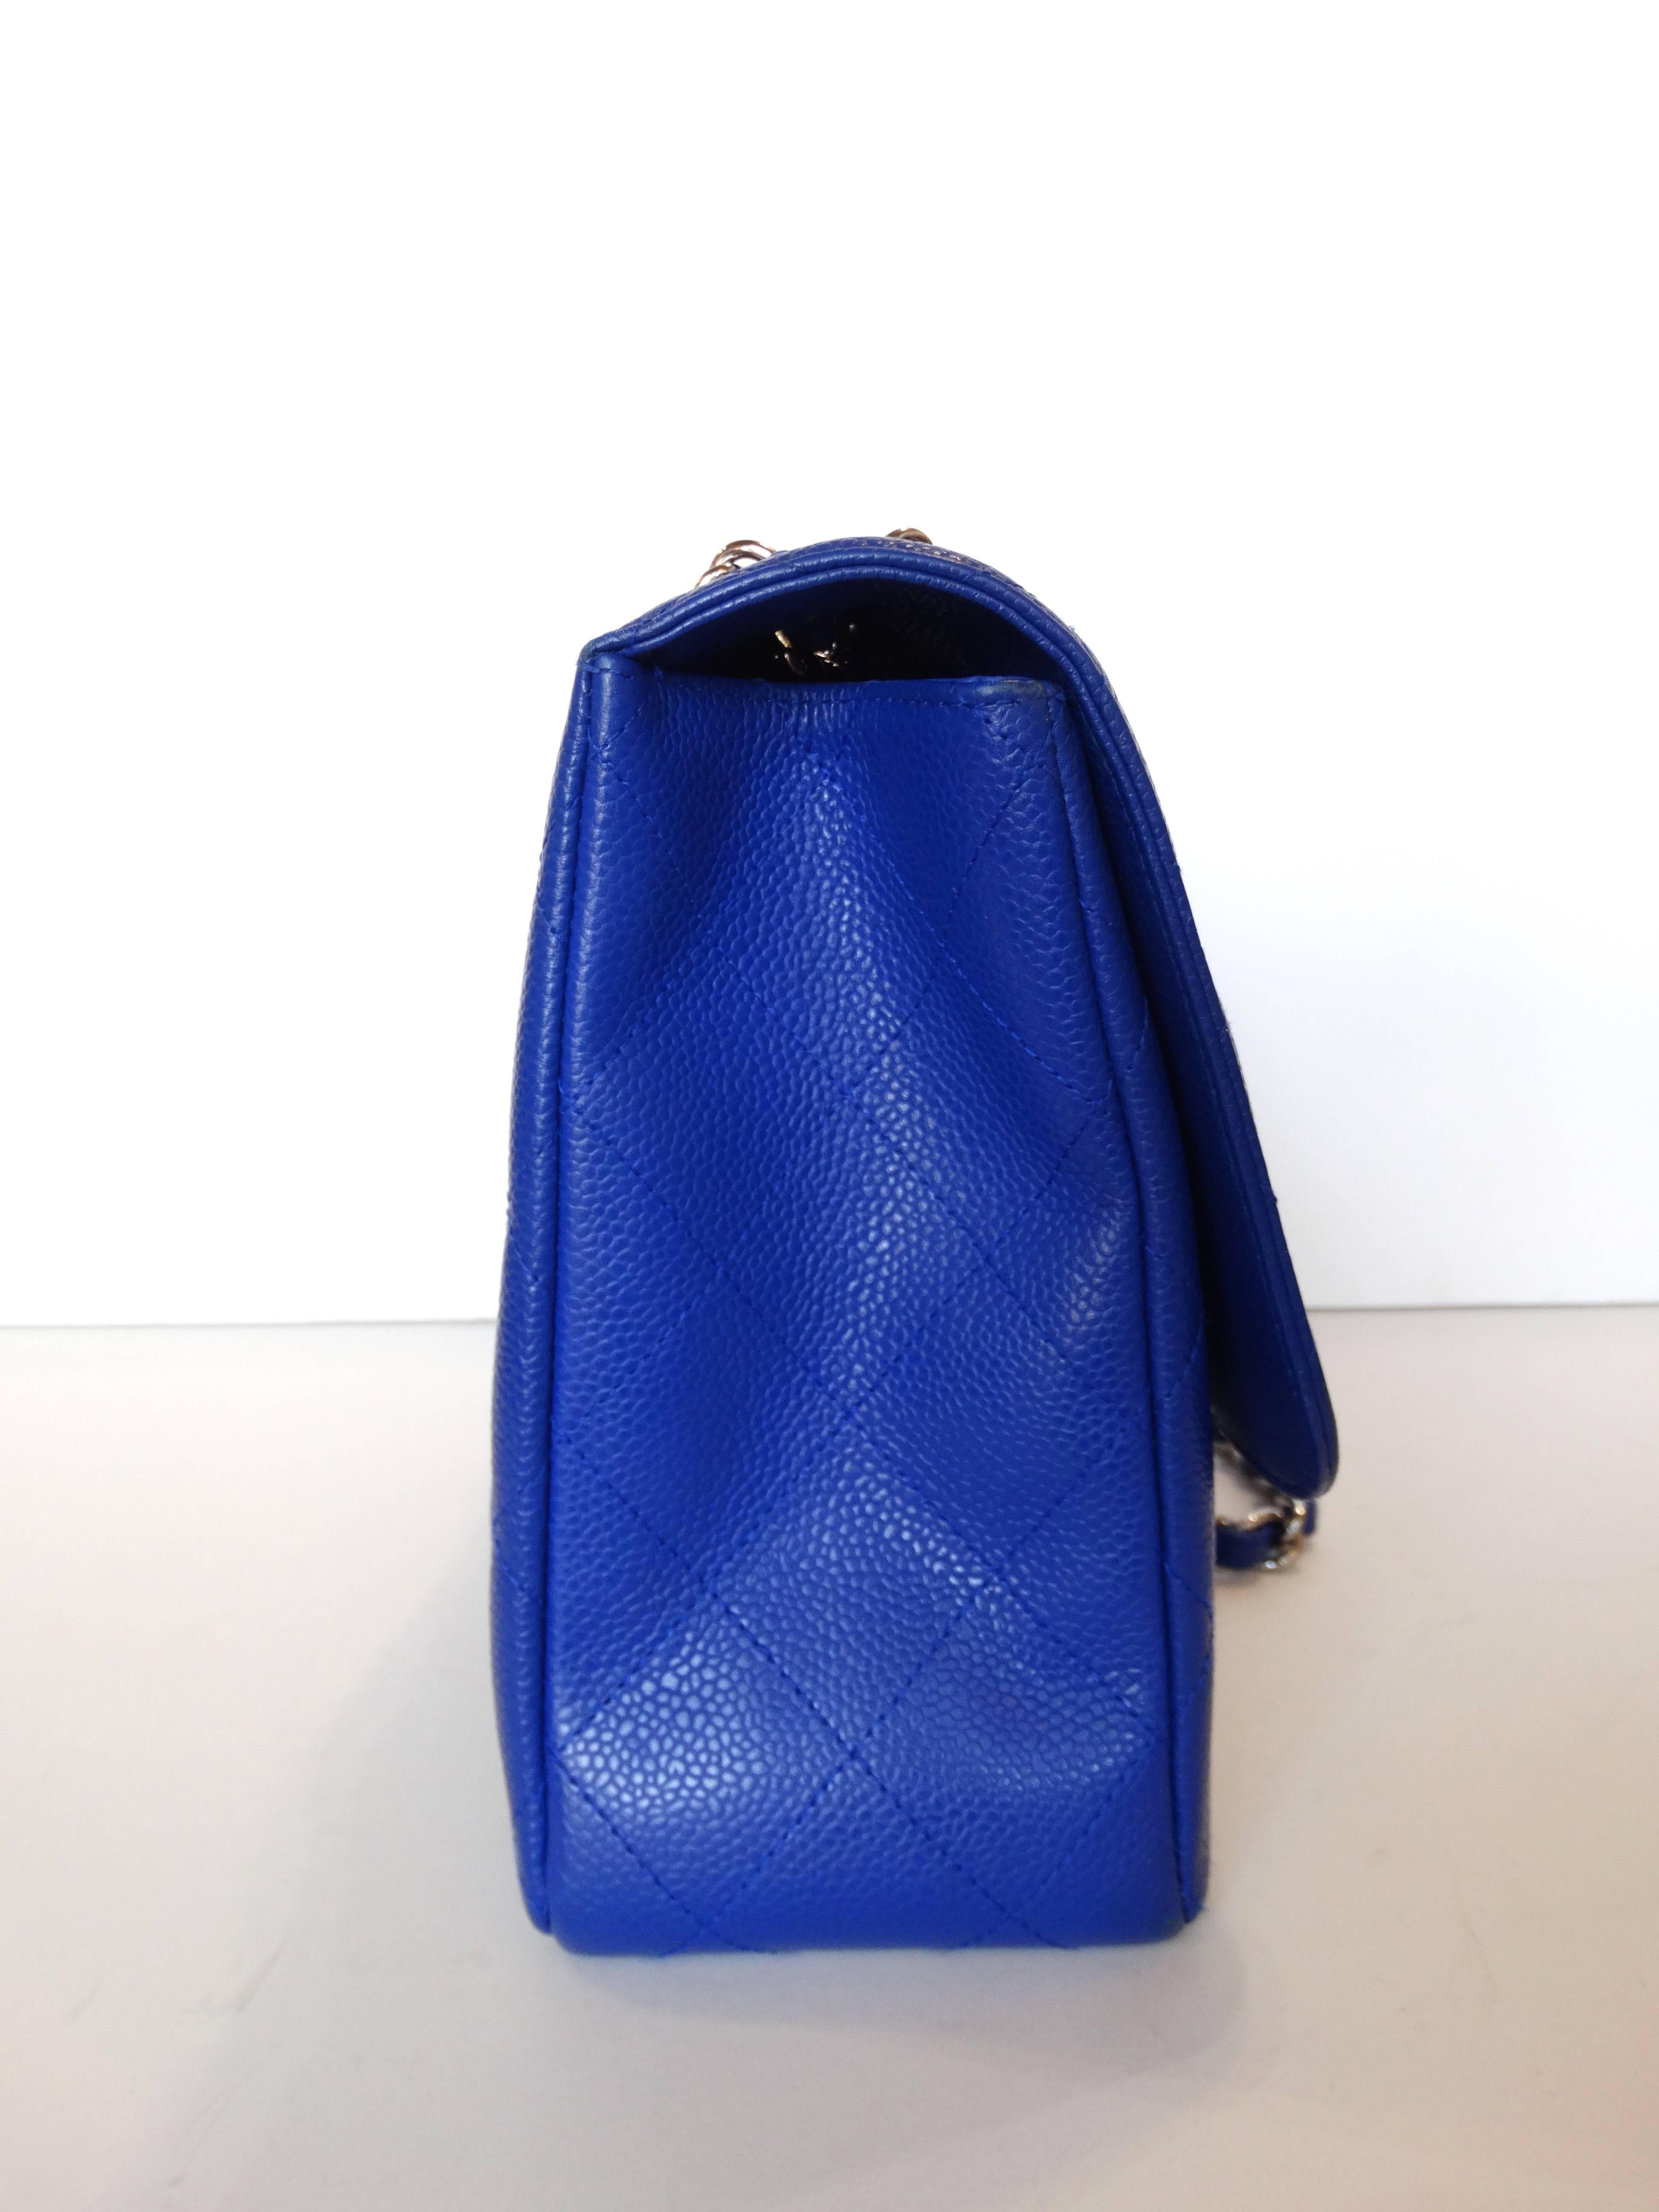 This bag is classic meets modern: with it's signature Chanel 10C Caviar Jumbo Classic in an oh-so-contemporary bleu roi color! The Jumbo size makes it the perfect everyday bag for carrying all your essentials. Textured caviar leather with stitched